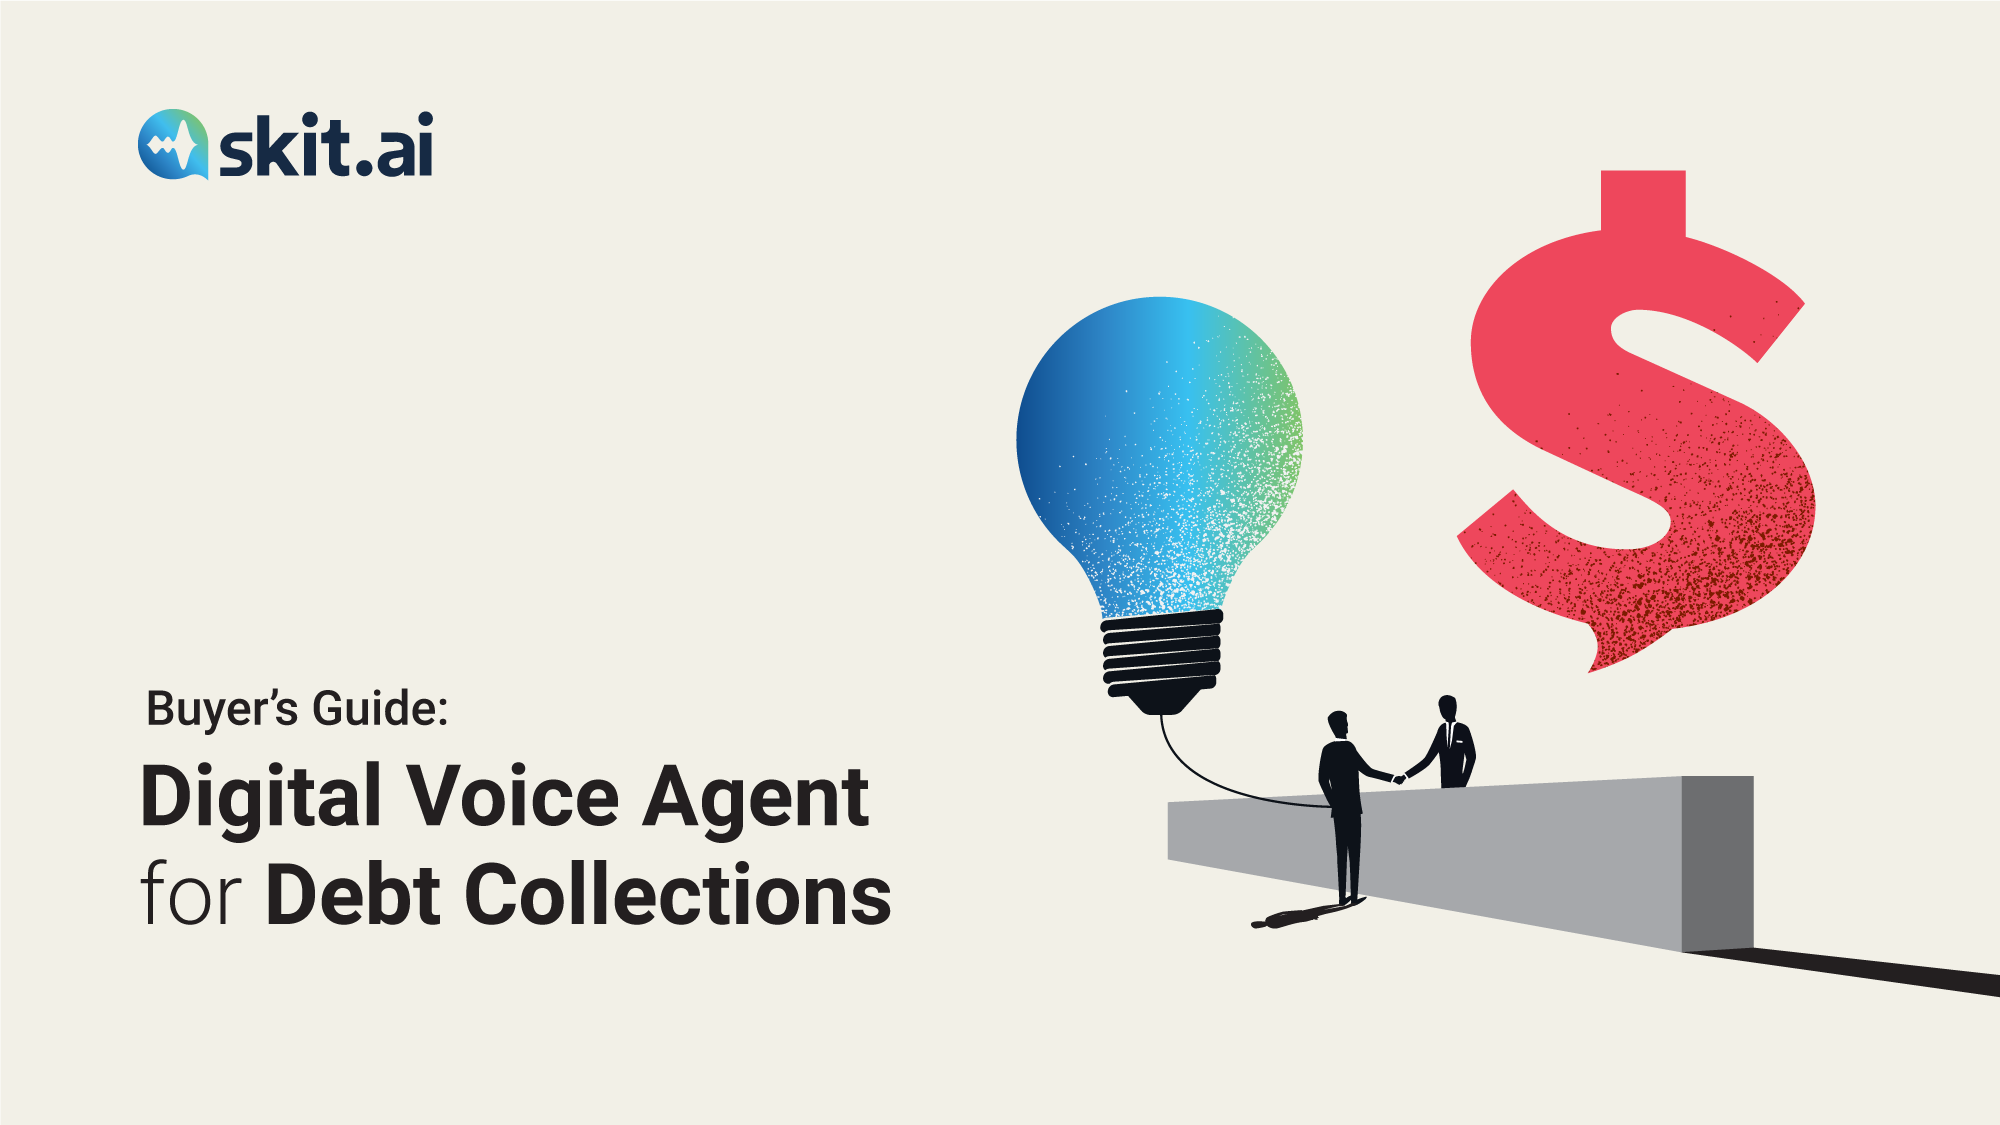 Buyer’s Guide: Digital Voice Agent for Debt Collections